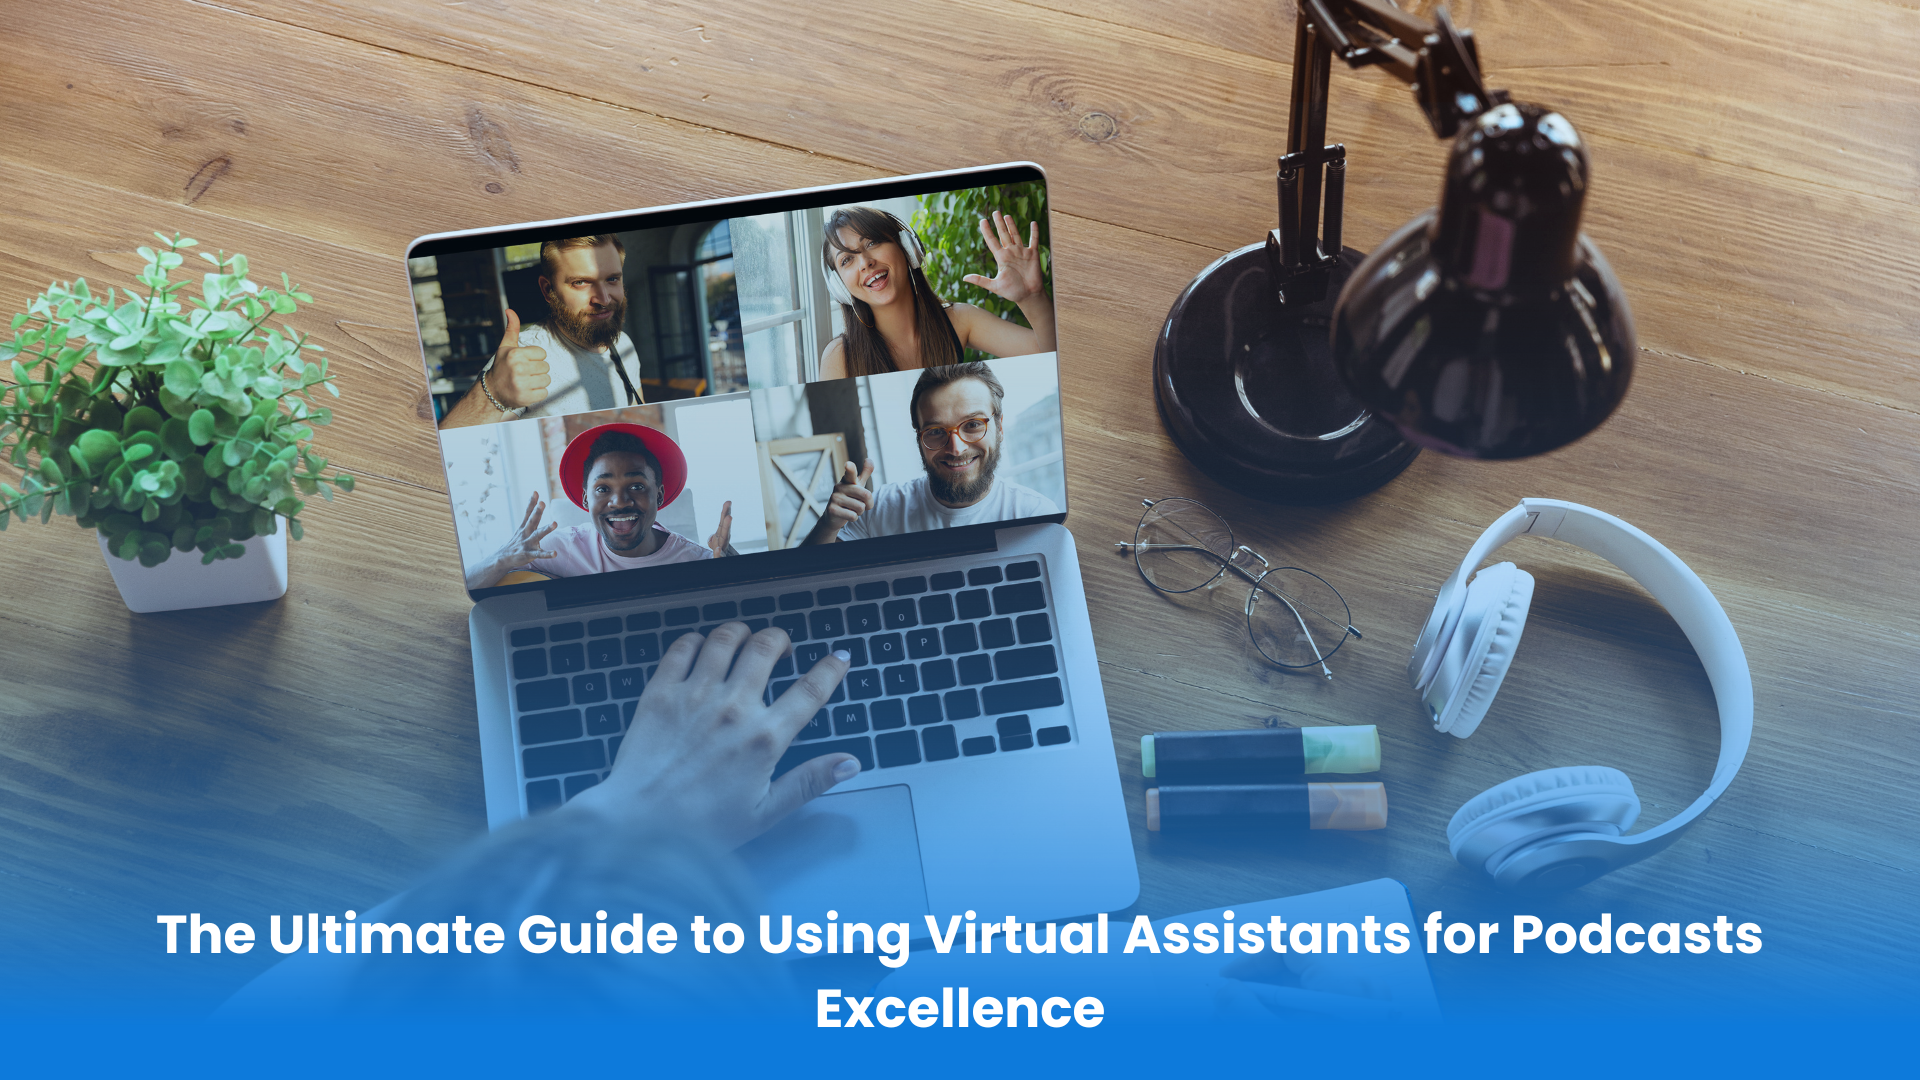 The ultimate guide to using virtual assistants for excellent podcasts.